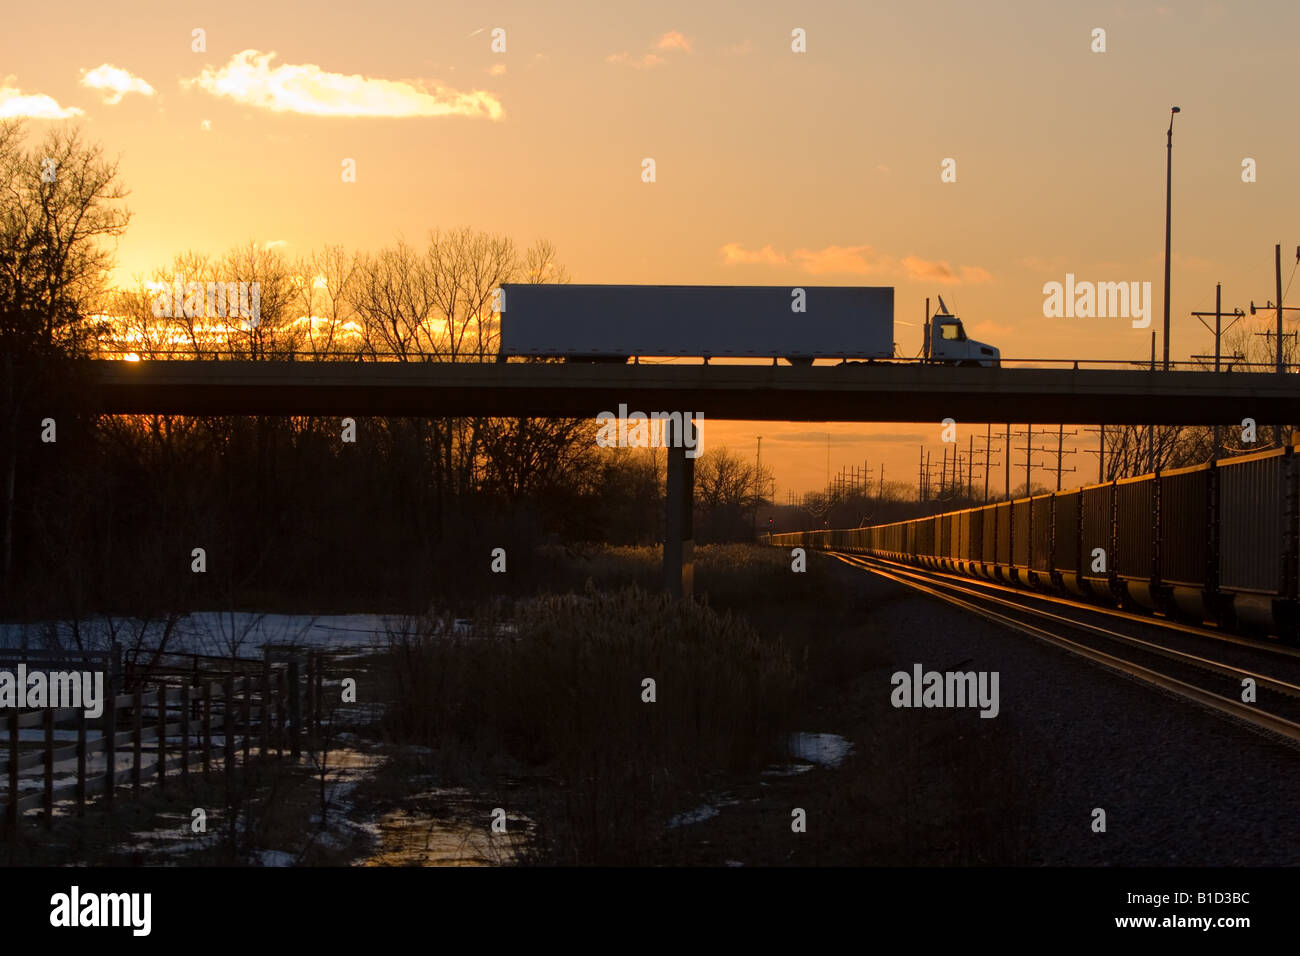 A tractor trailer truck passes over a loaded coal train as the sun sets. Stock Photo